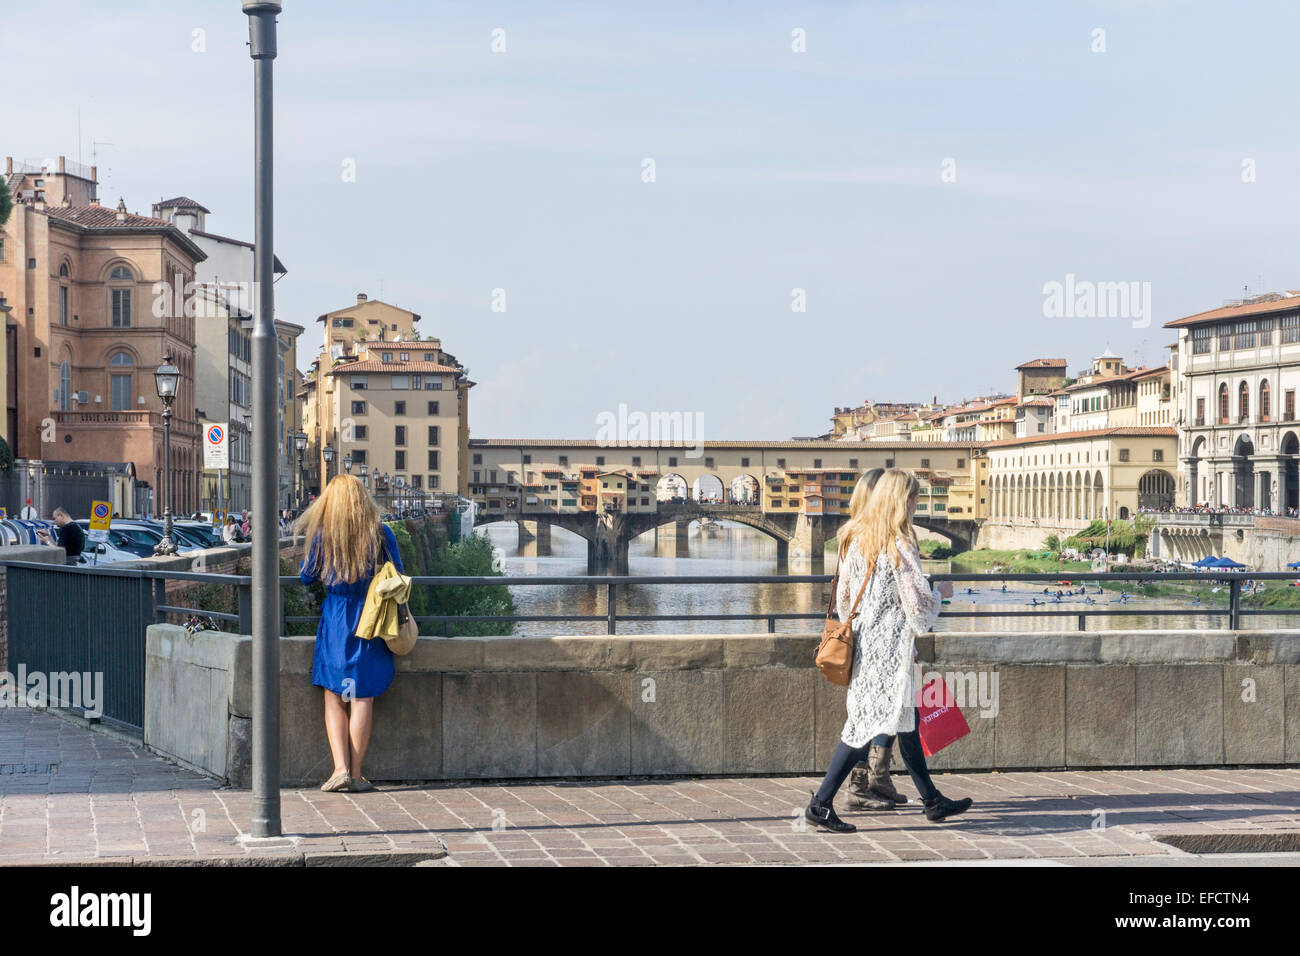 girl in blue dress with long fair hair stands at rail of Ponte alle Grazie gazing at Arno as 2 other pretty girls pass by Stock Photo